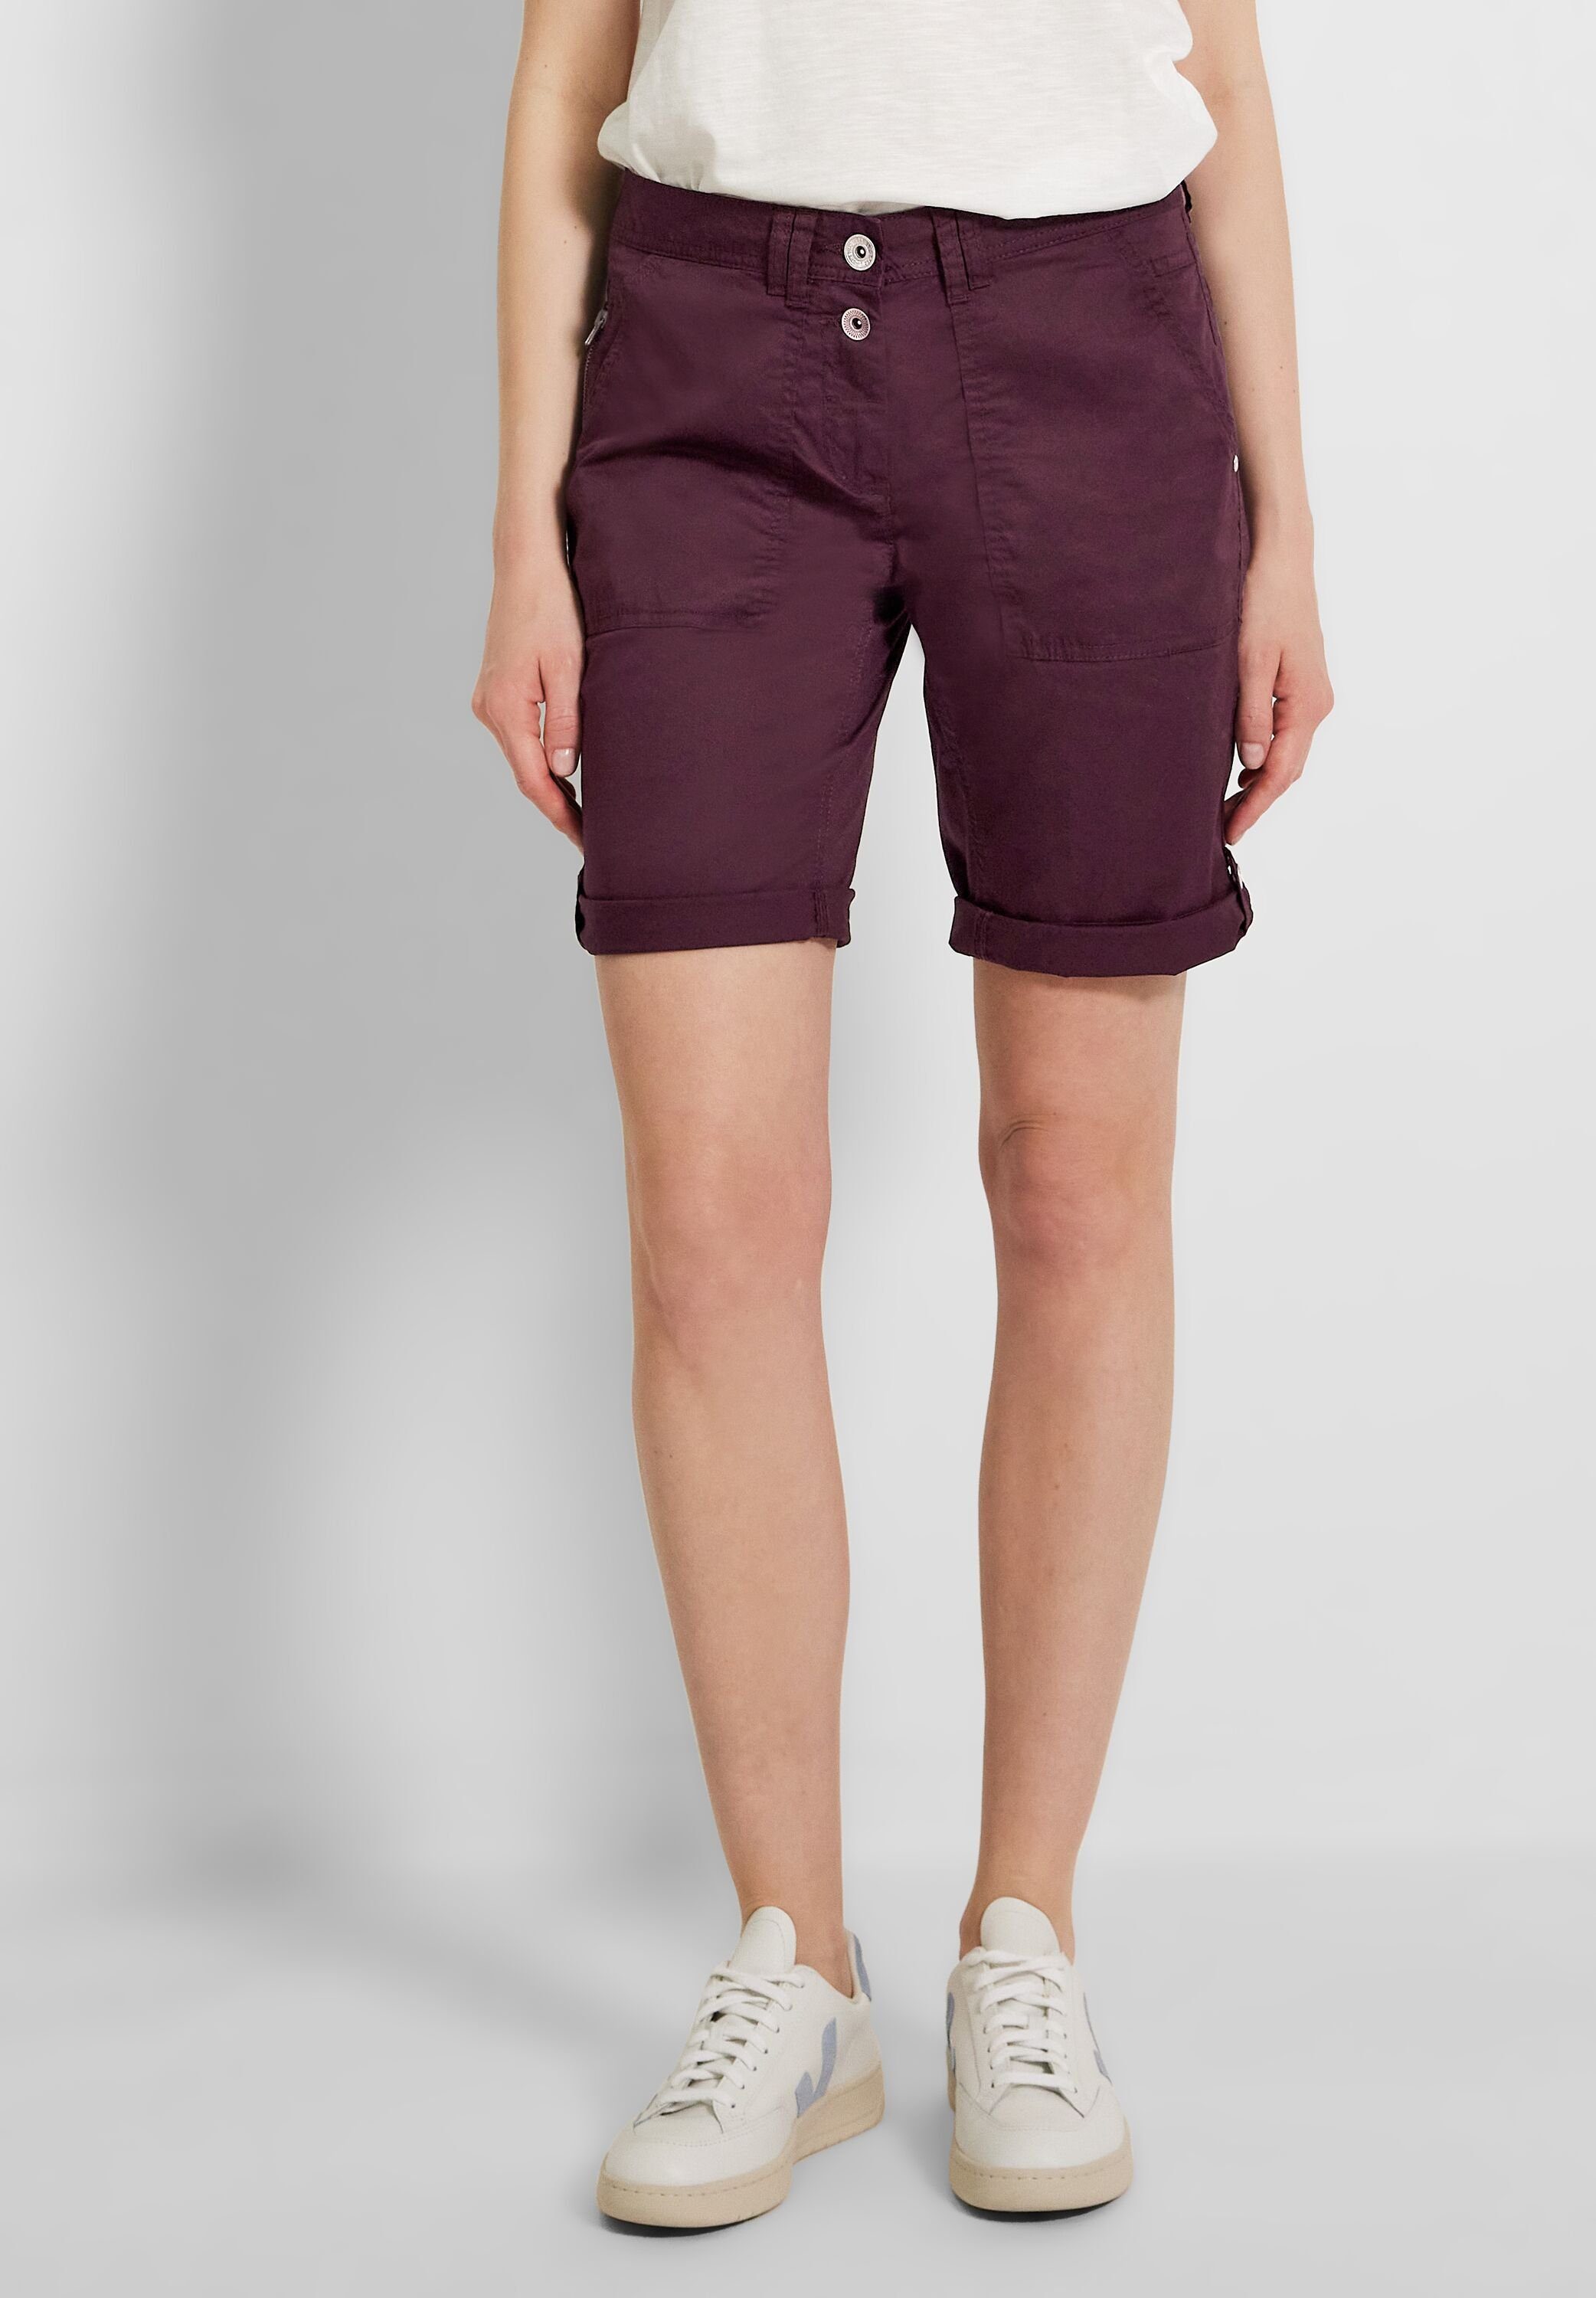 Cecil Shorts Cecil Loose Fit Shorts in Wineberry Red (1-tlg) Zipper